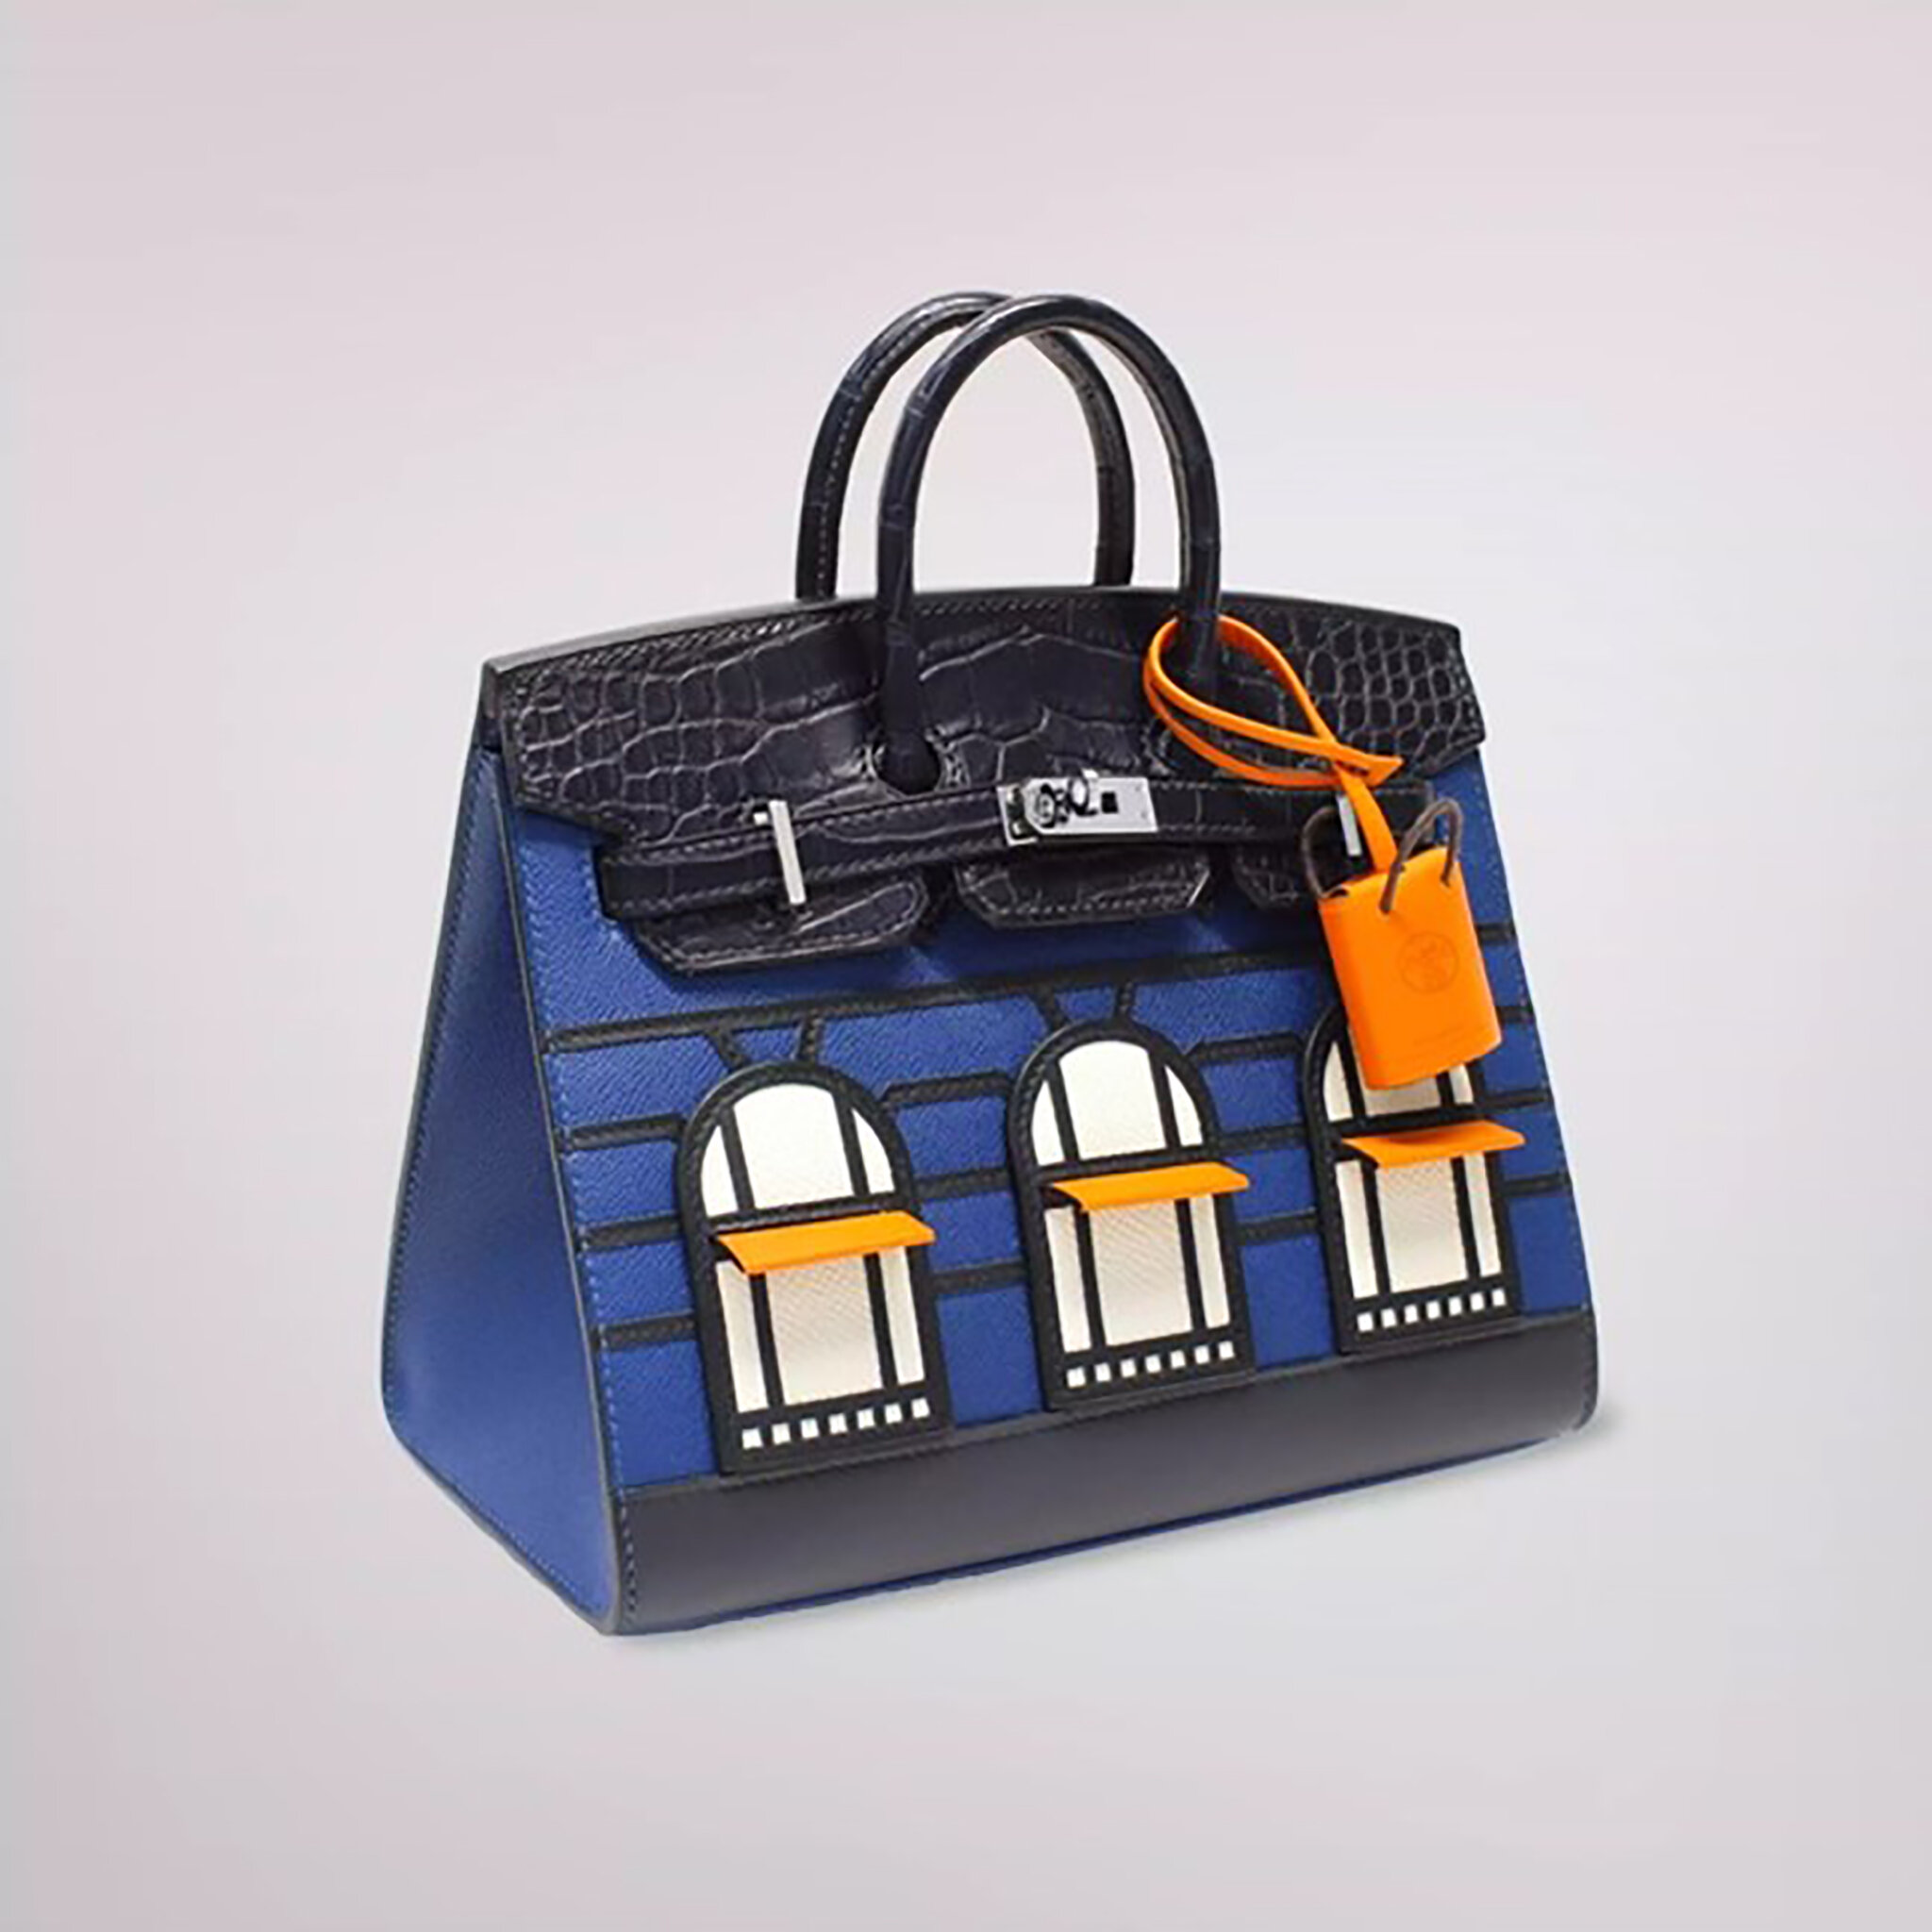 Hermès Birkin: 7 Things You Didn't Know About The World's Most In-Demand  Bag